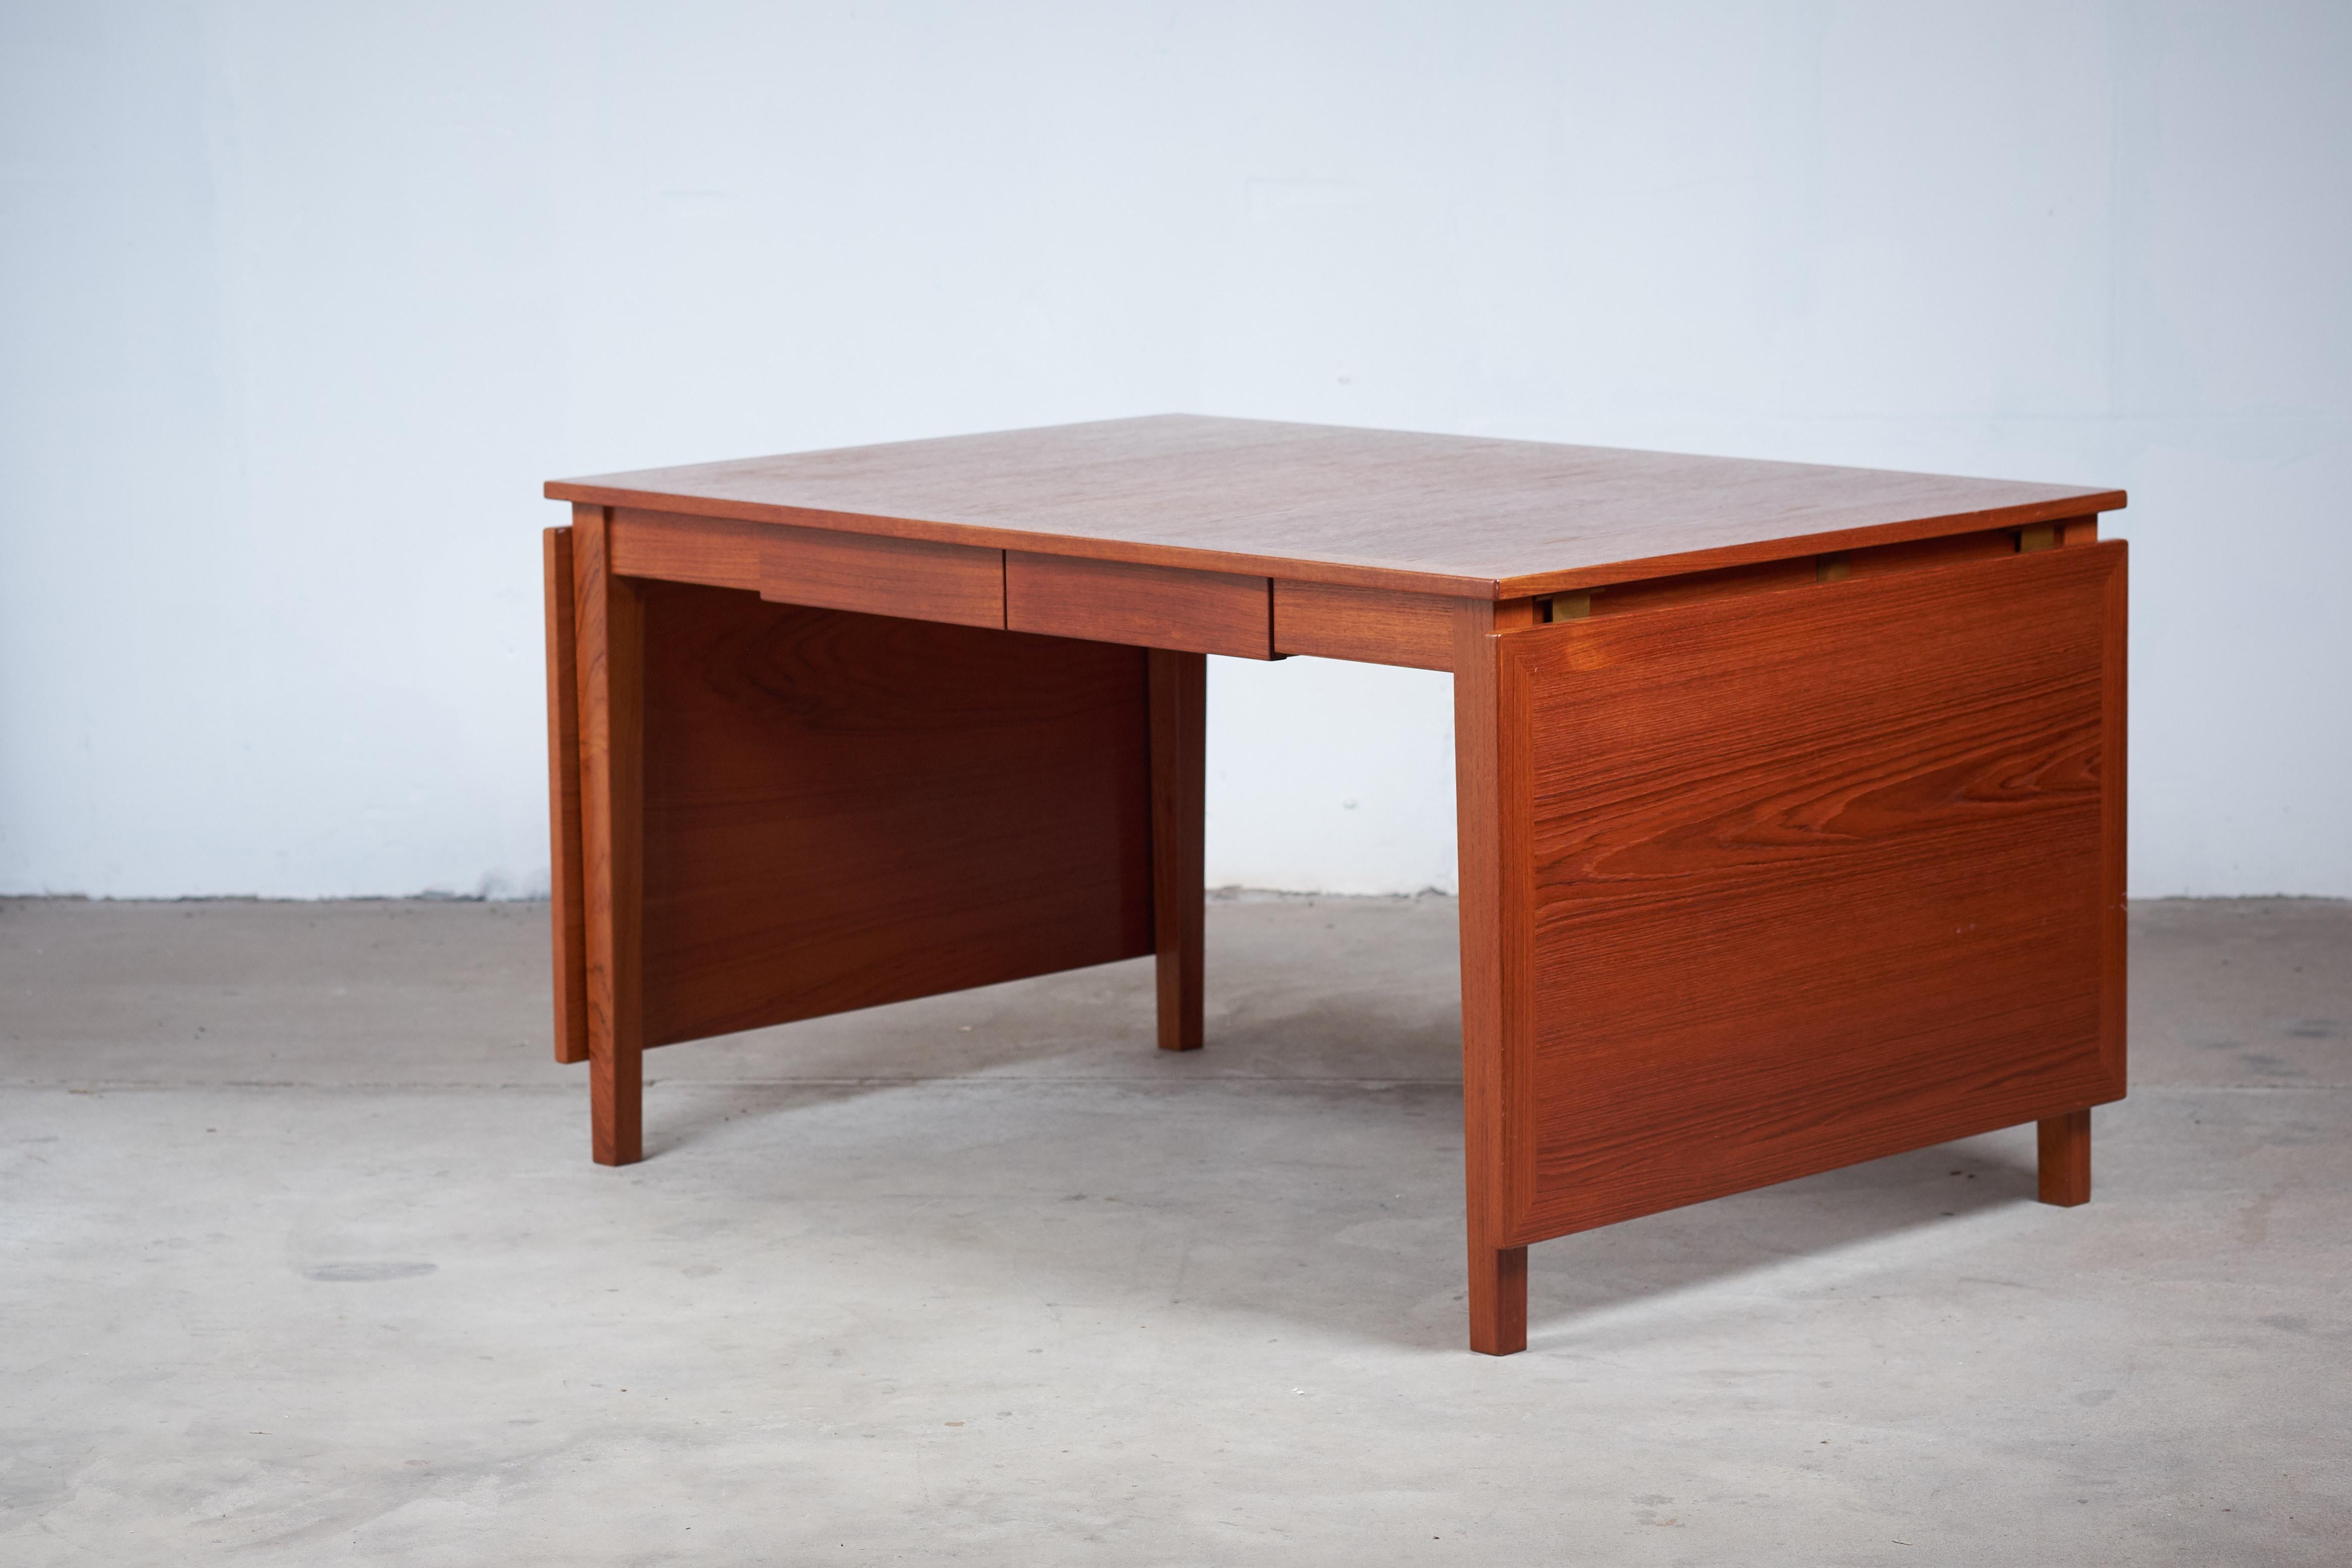 Kai Winding dining table in teak with drop leafs and two drawers.
This amazing dining table can be extended with the two removable drop leafs on each side so it will fit around 10-12 prs.
The table are in good condition.
Leaves are 55cm each.